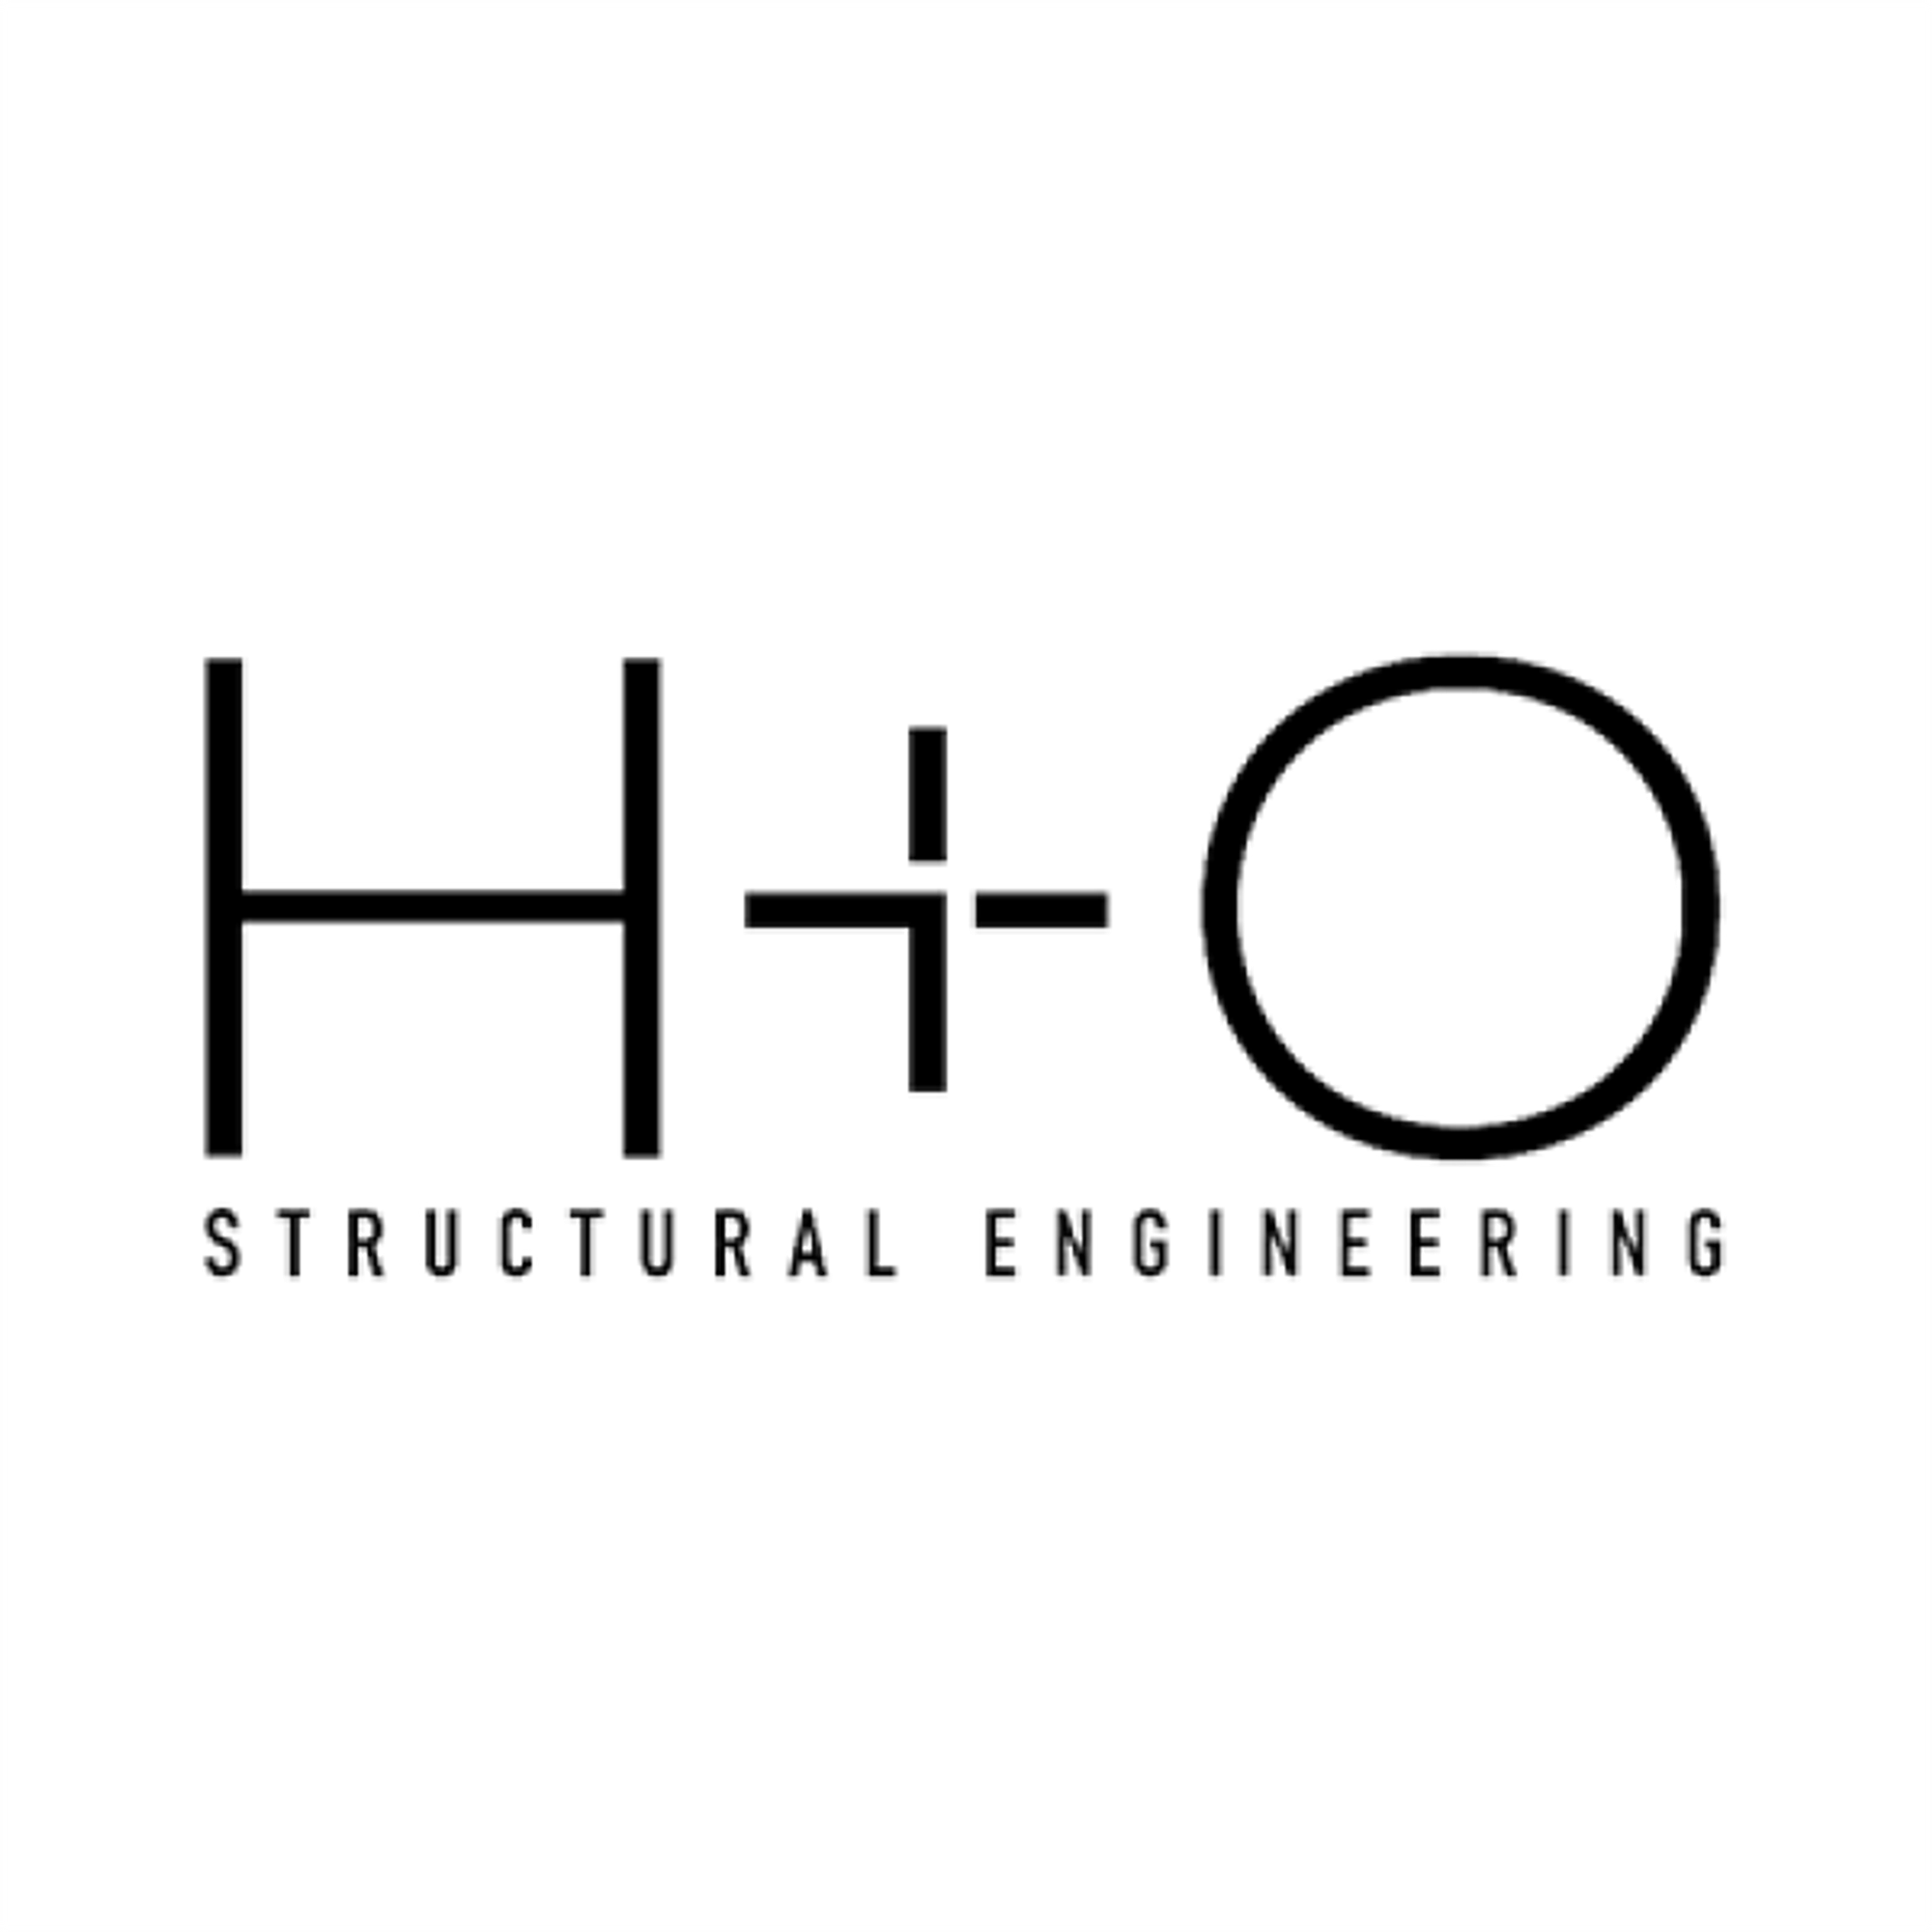 Structural Engineering @ H+O